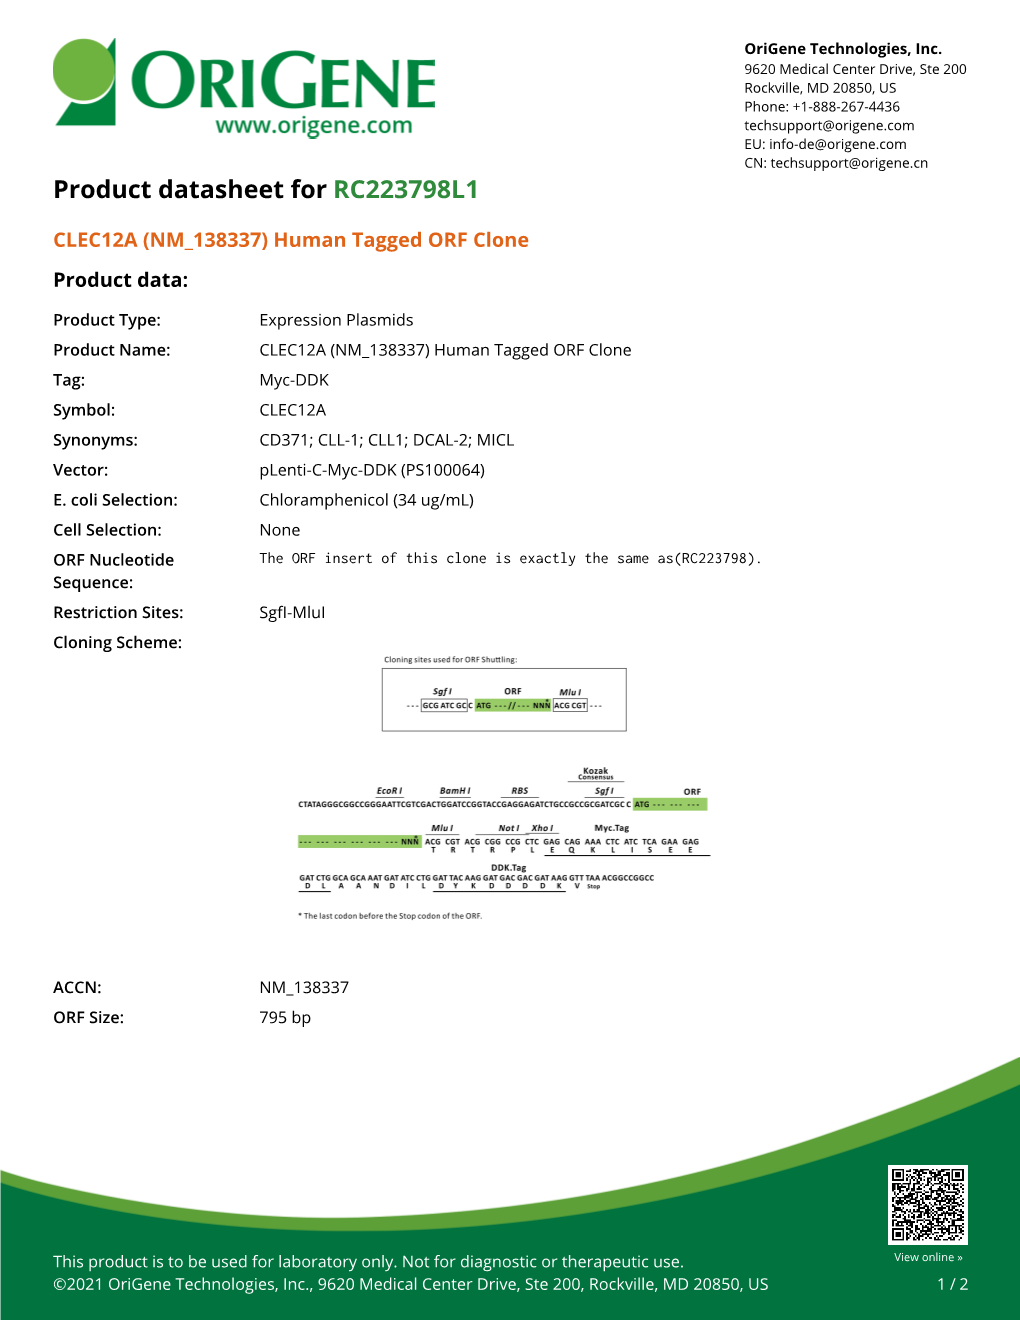 CLEC12A (NM 138337) Human Tagged ORF Clone Product Data